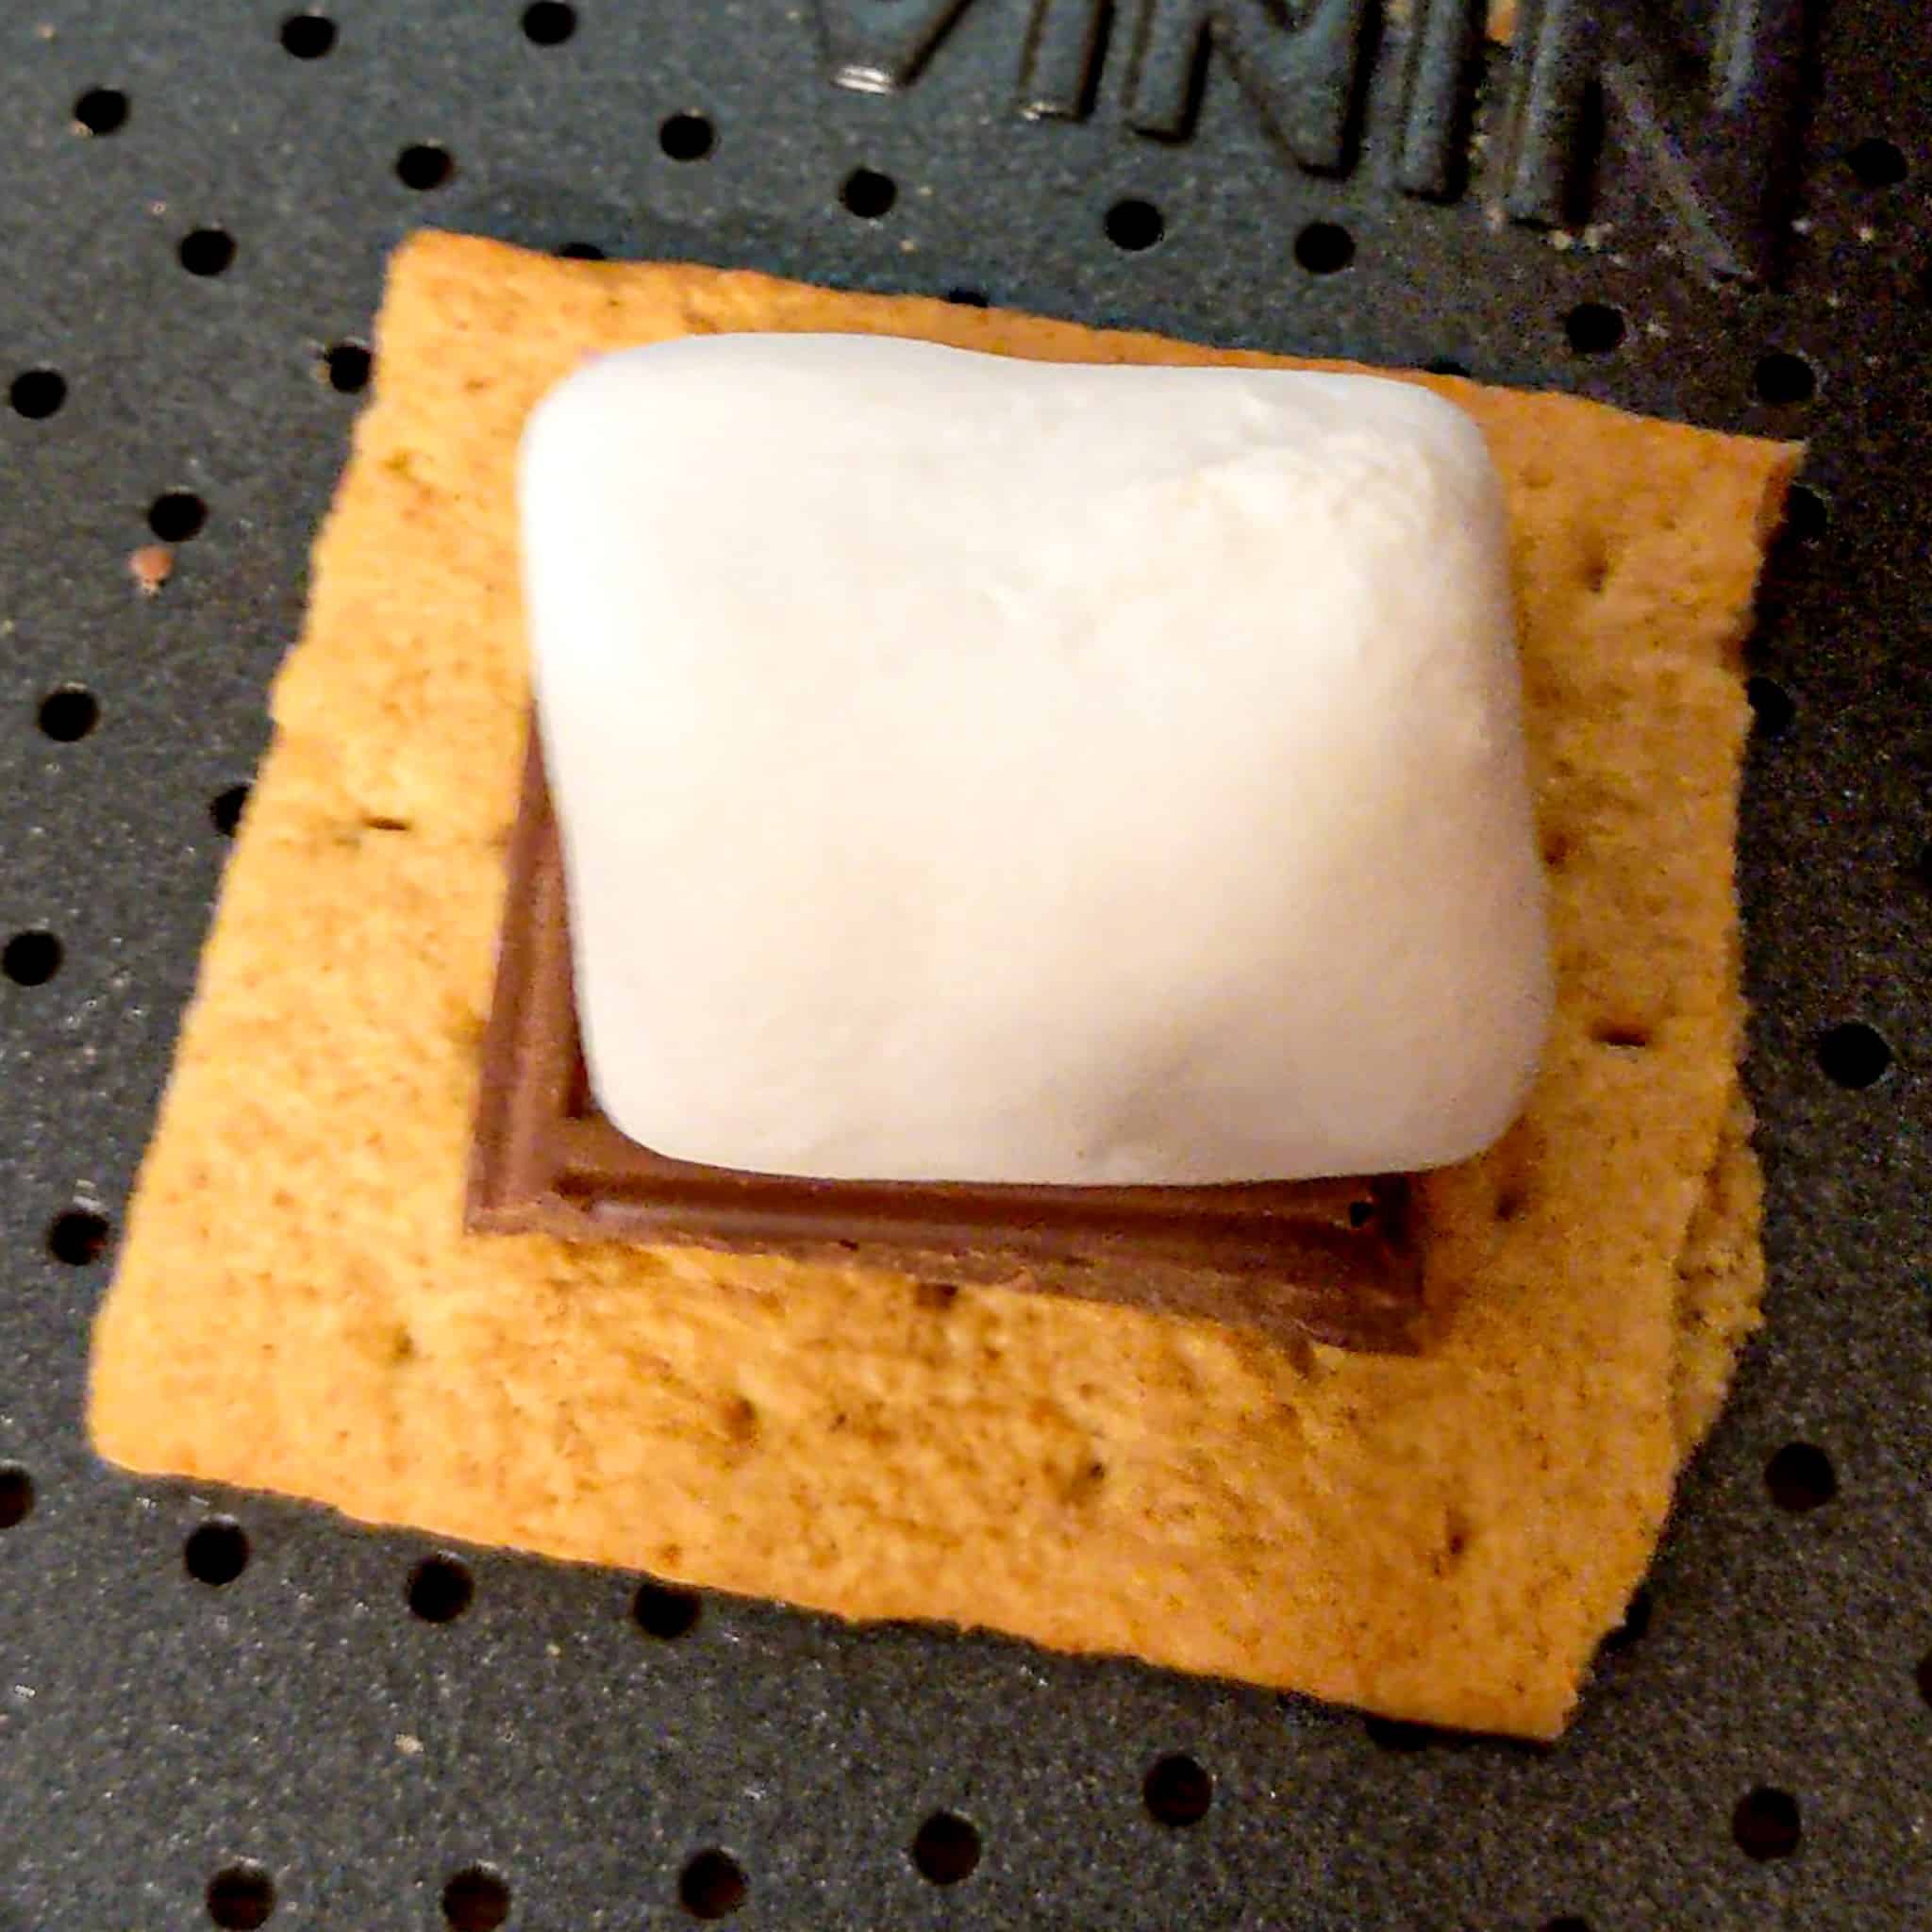 honey maid graham cracker with Hershey's milk chocolate and jet-puffed marshmallow for the air fryer s'mores cookies recipe on an air fryer tray